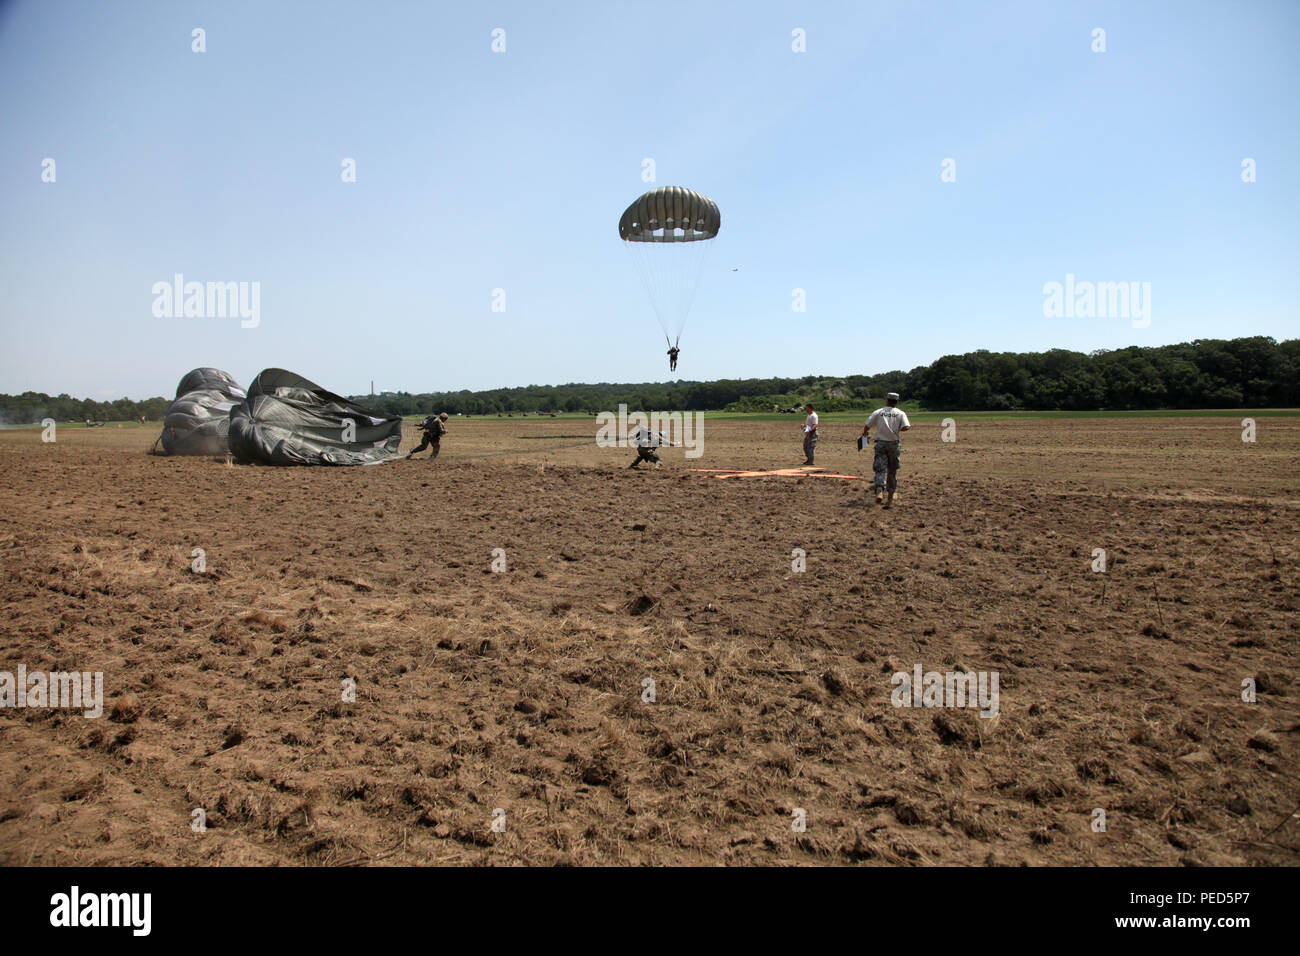 Paratroopers attempt to reach a target as quickly as possible on the drop zone at Leapfest in West Kingston, R.I., Aug. 1, 2015. Leapfest is an International parachute competition hosted by the 56th Troop Command, Rhode Island National Guard to promote high level technical training and esprit de corps within the International Airborne community. (U.S. Army Photo by Spc. Josephine Carlson/Released) Stock Photo